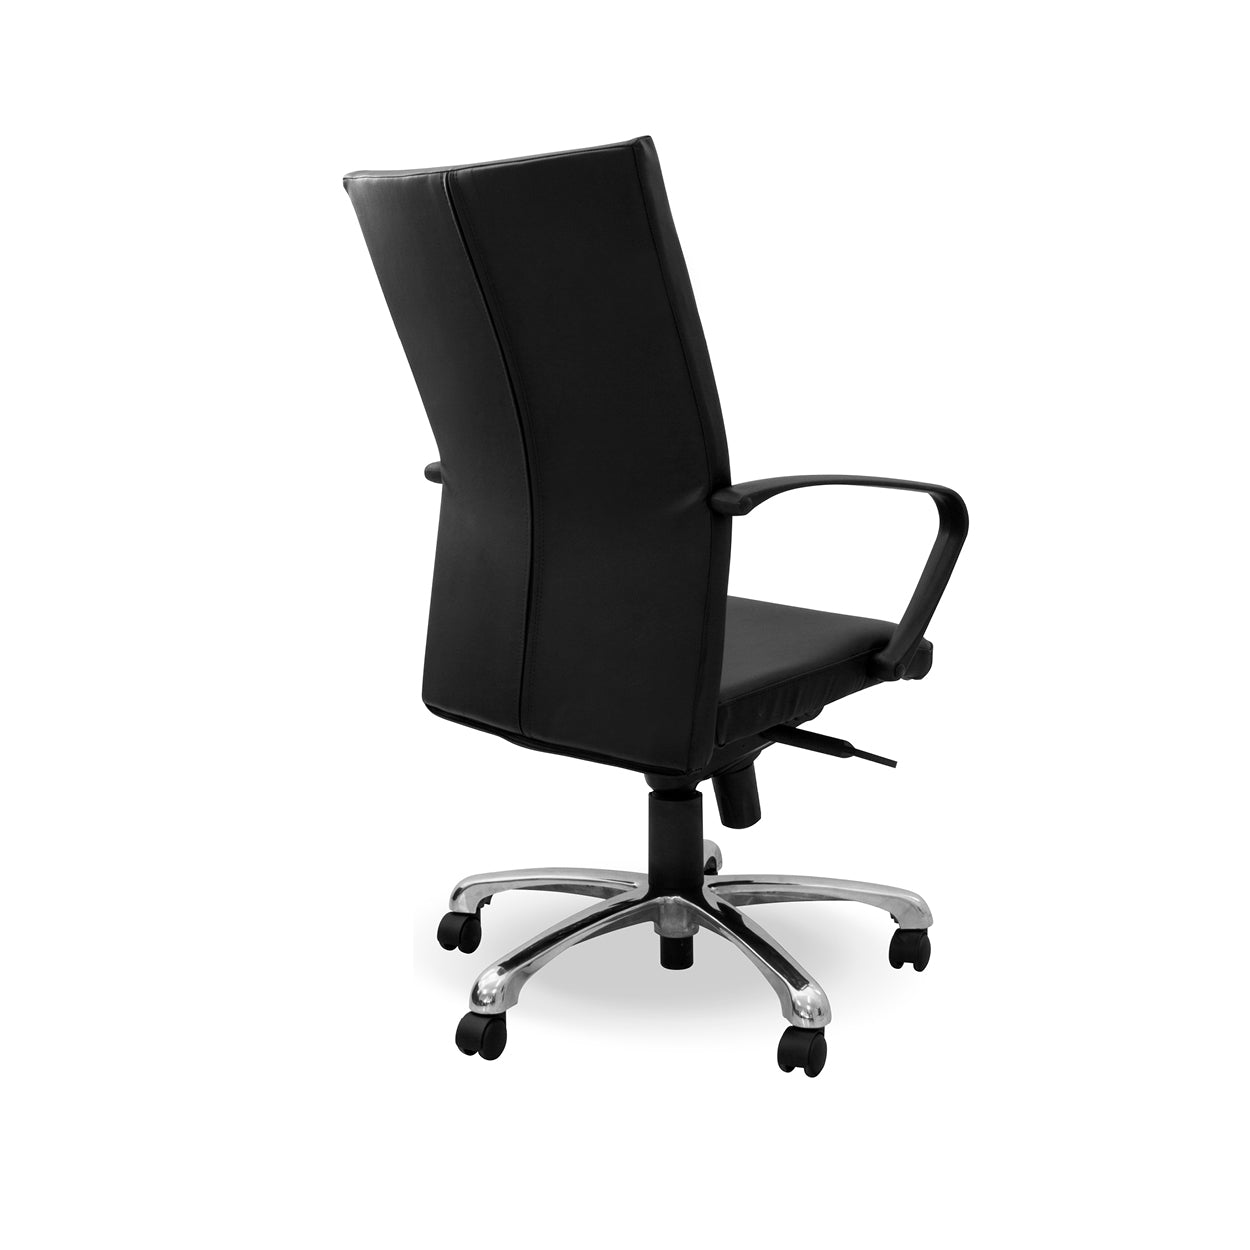 Hedcor Anglo high back office chair